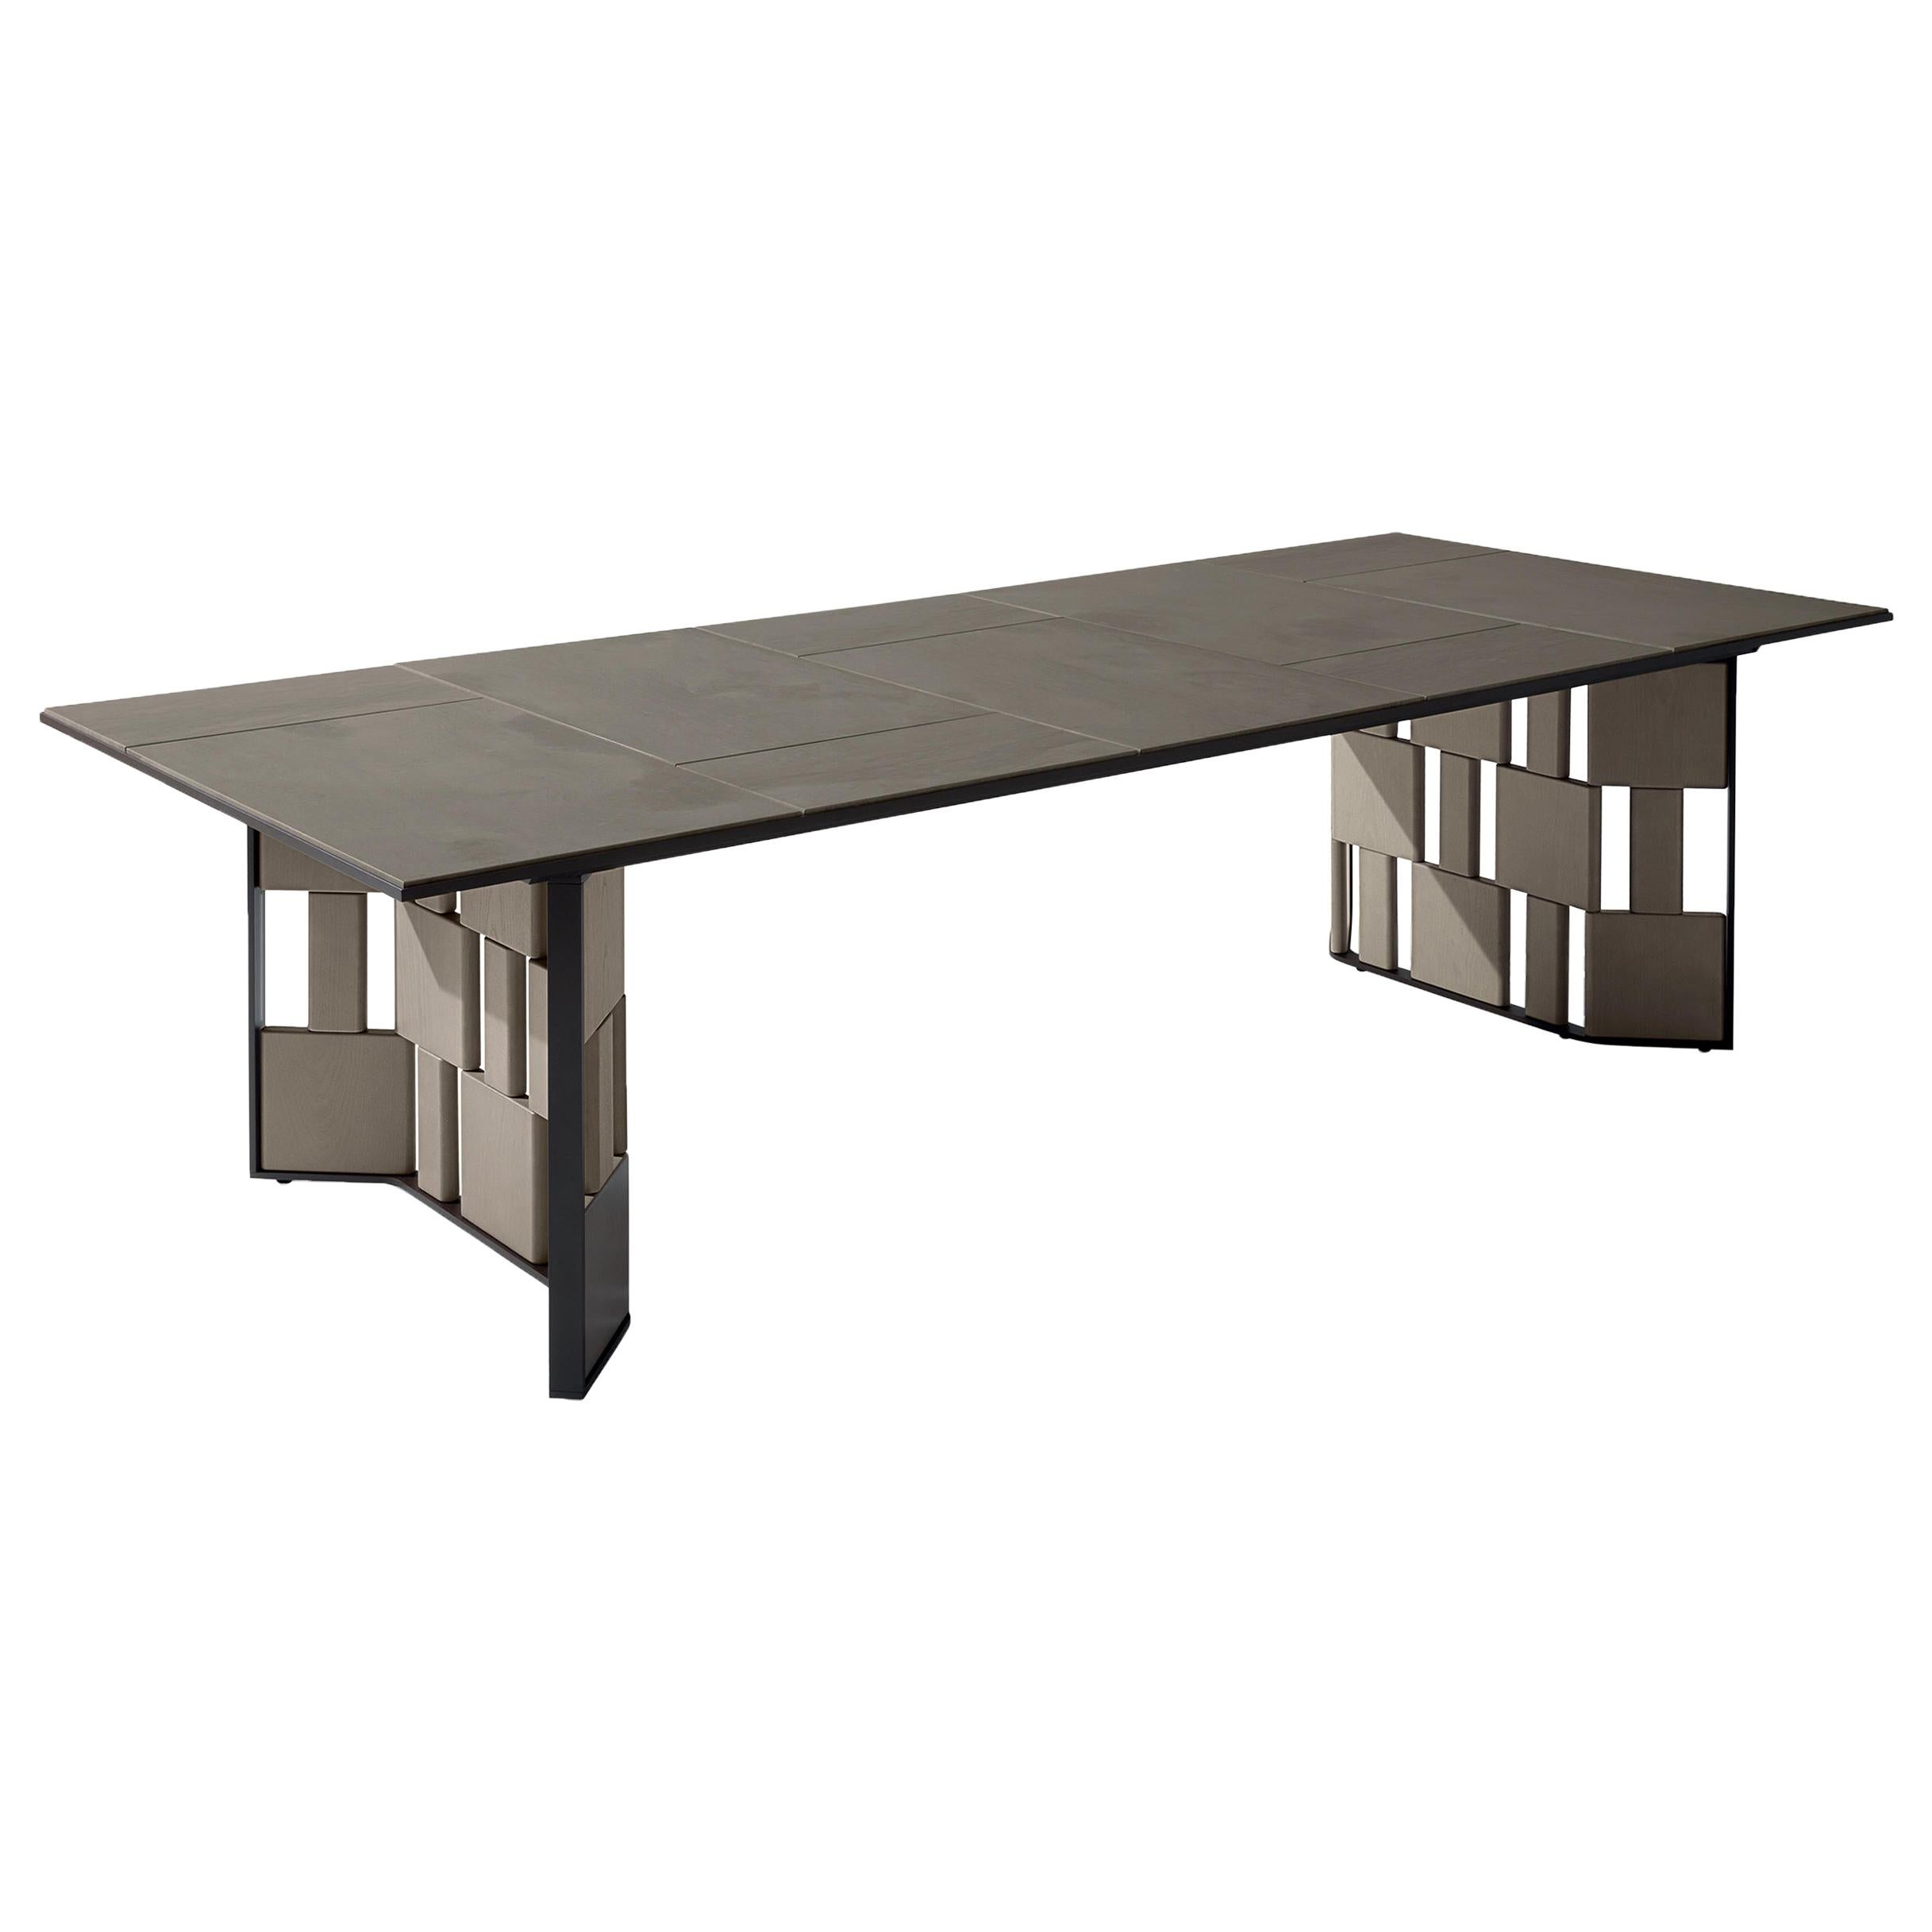 Giorgetti Break Outdoor Stone Dining Table designed by Ludovica+Roberto Palomba For Sale